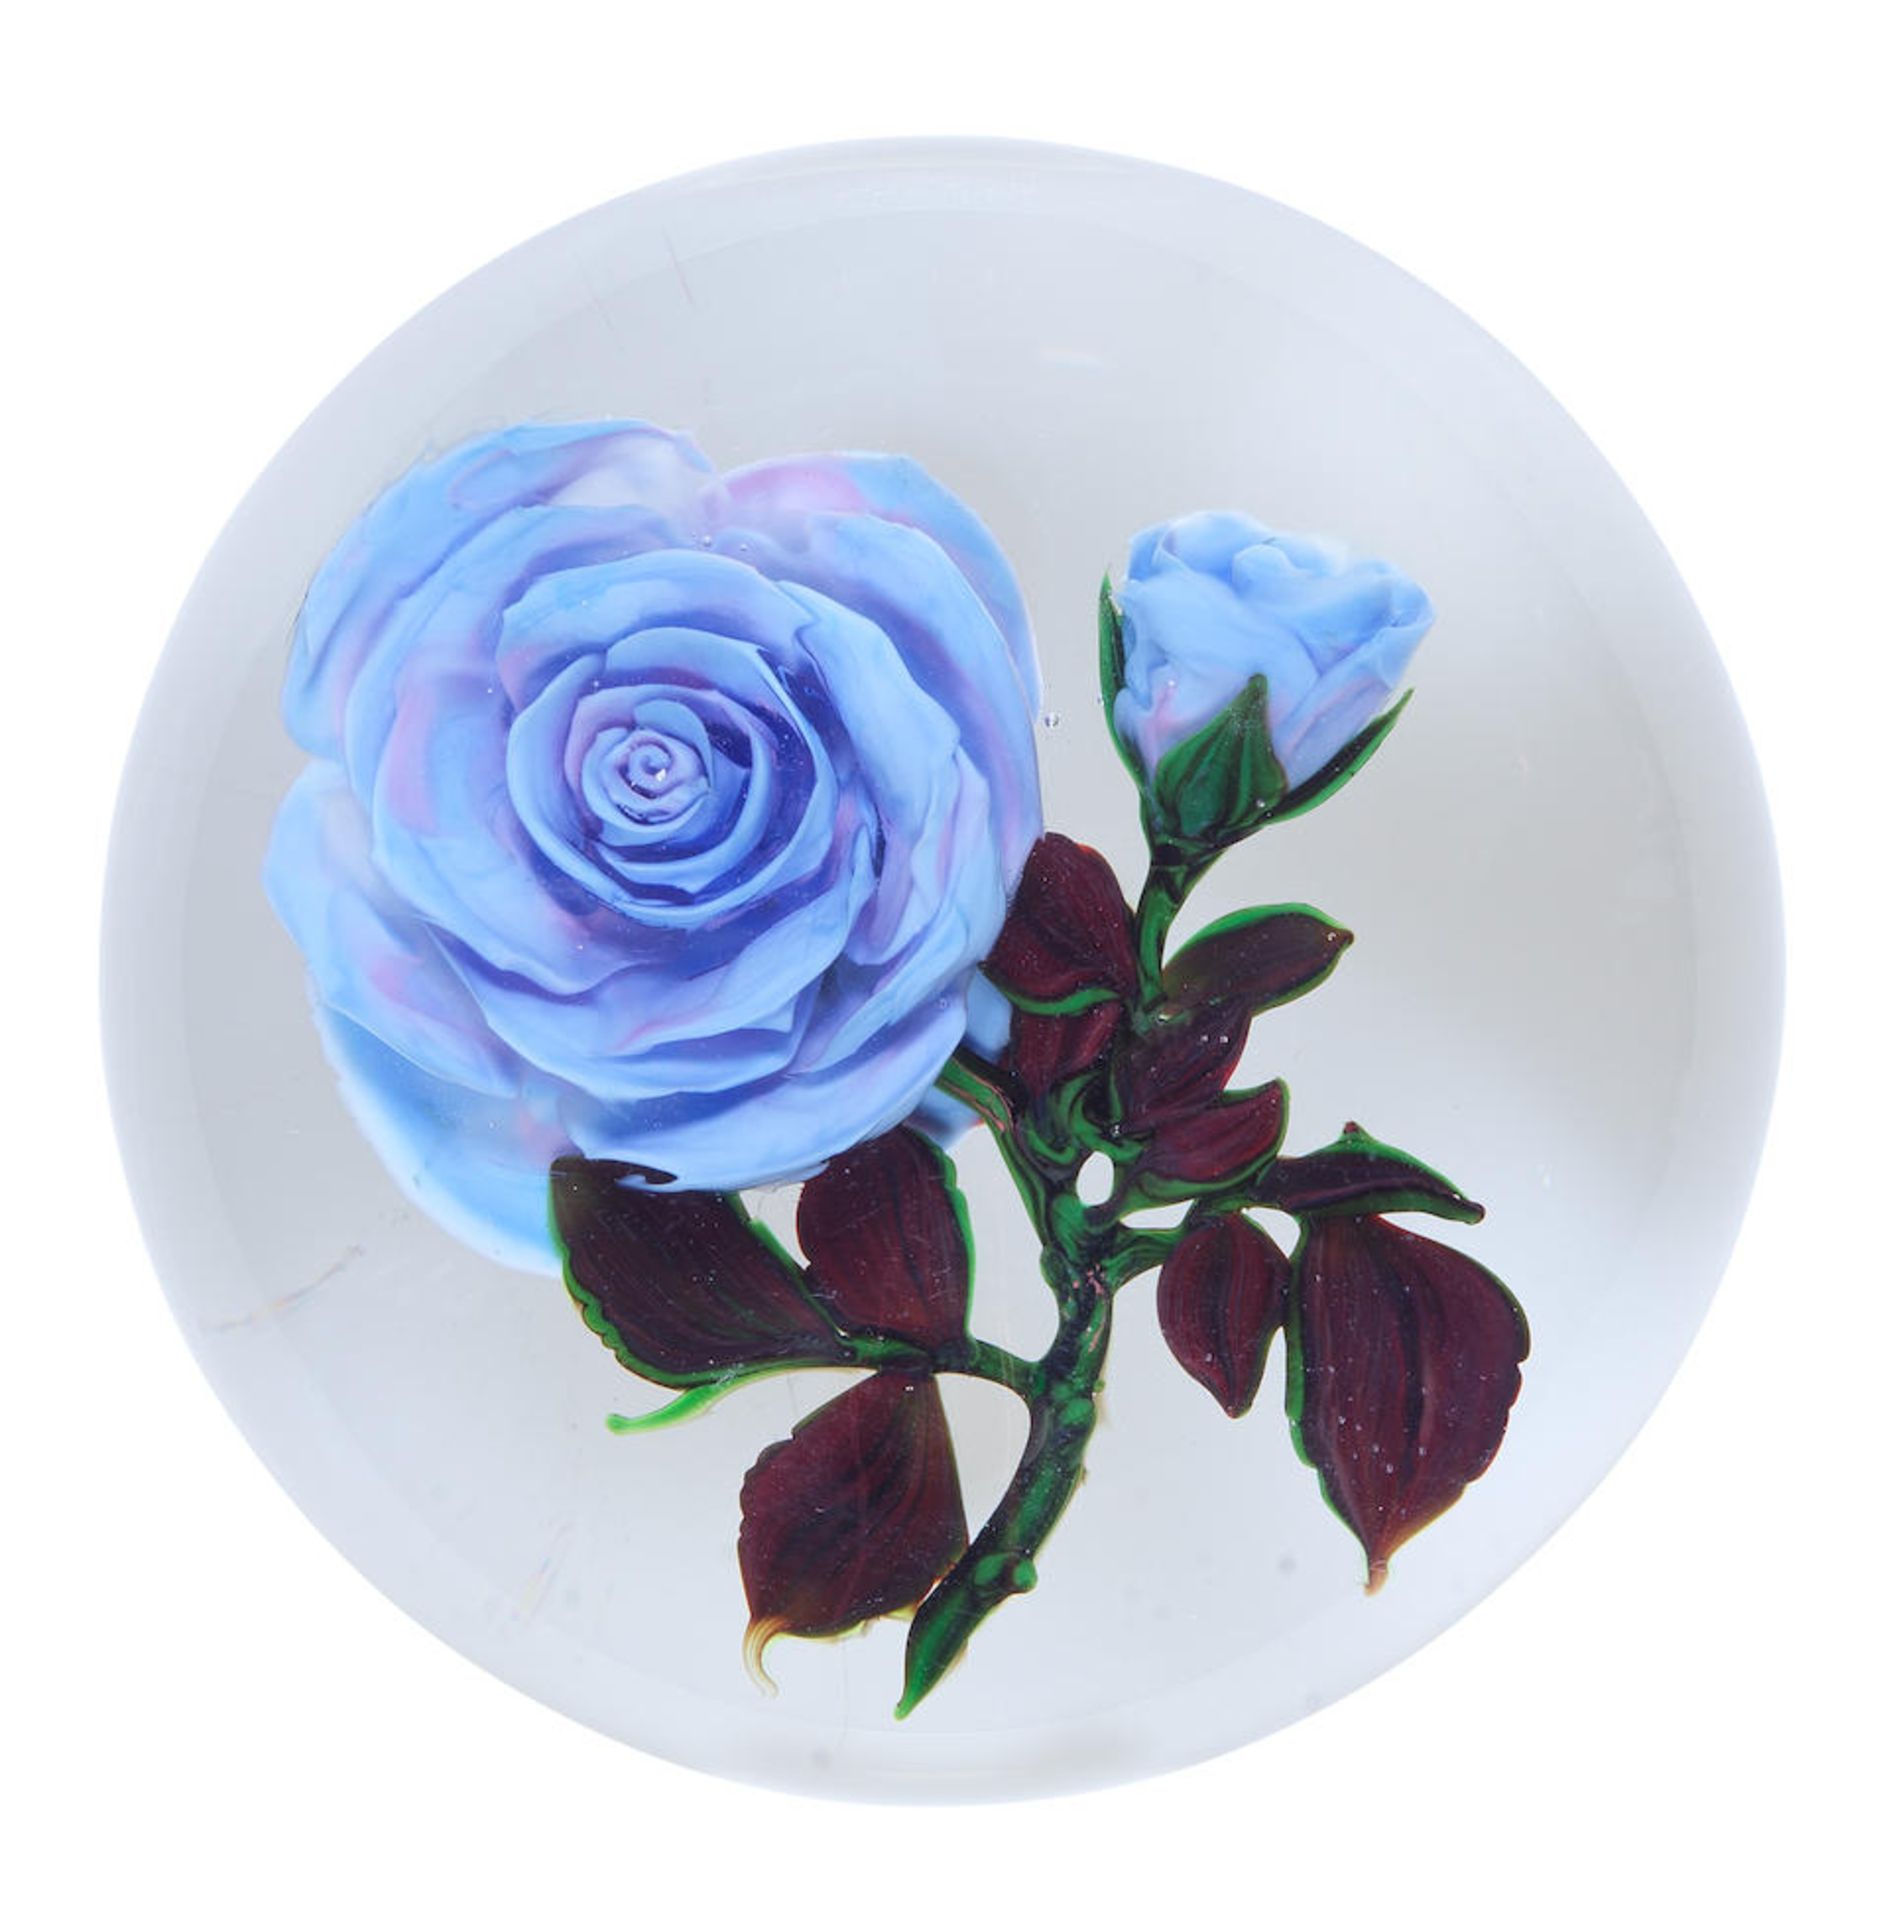 A Rick Ayotte blue rose spray magnum paperweight, dated 1996